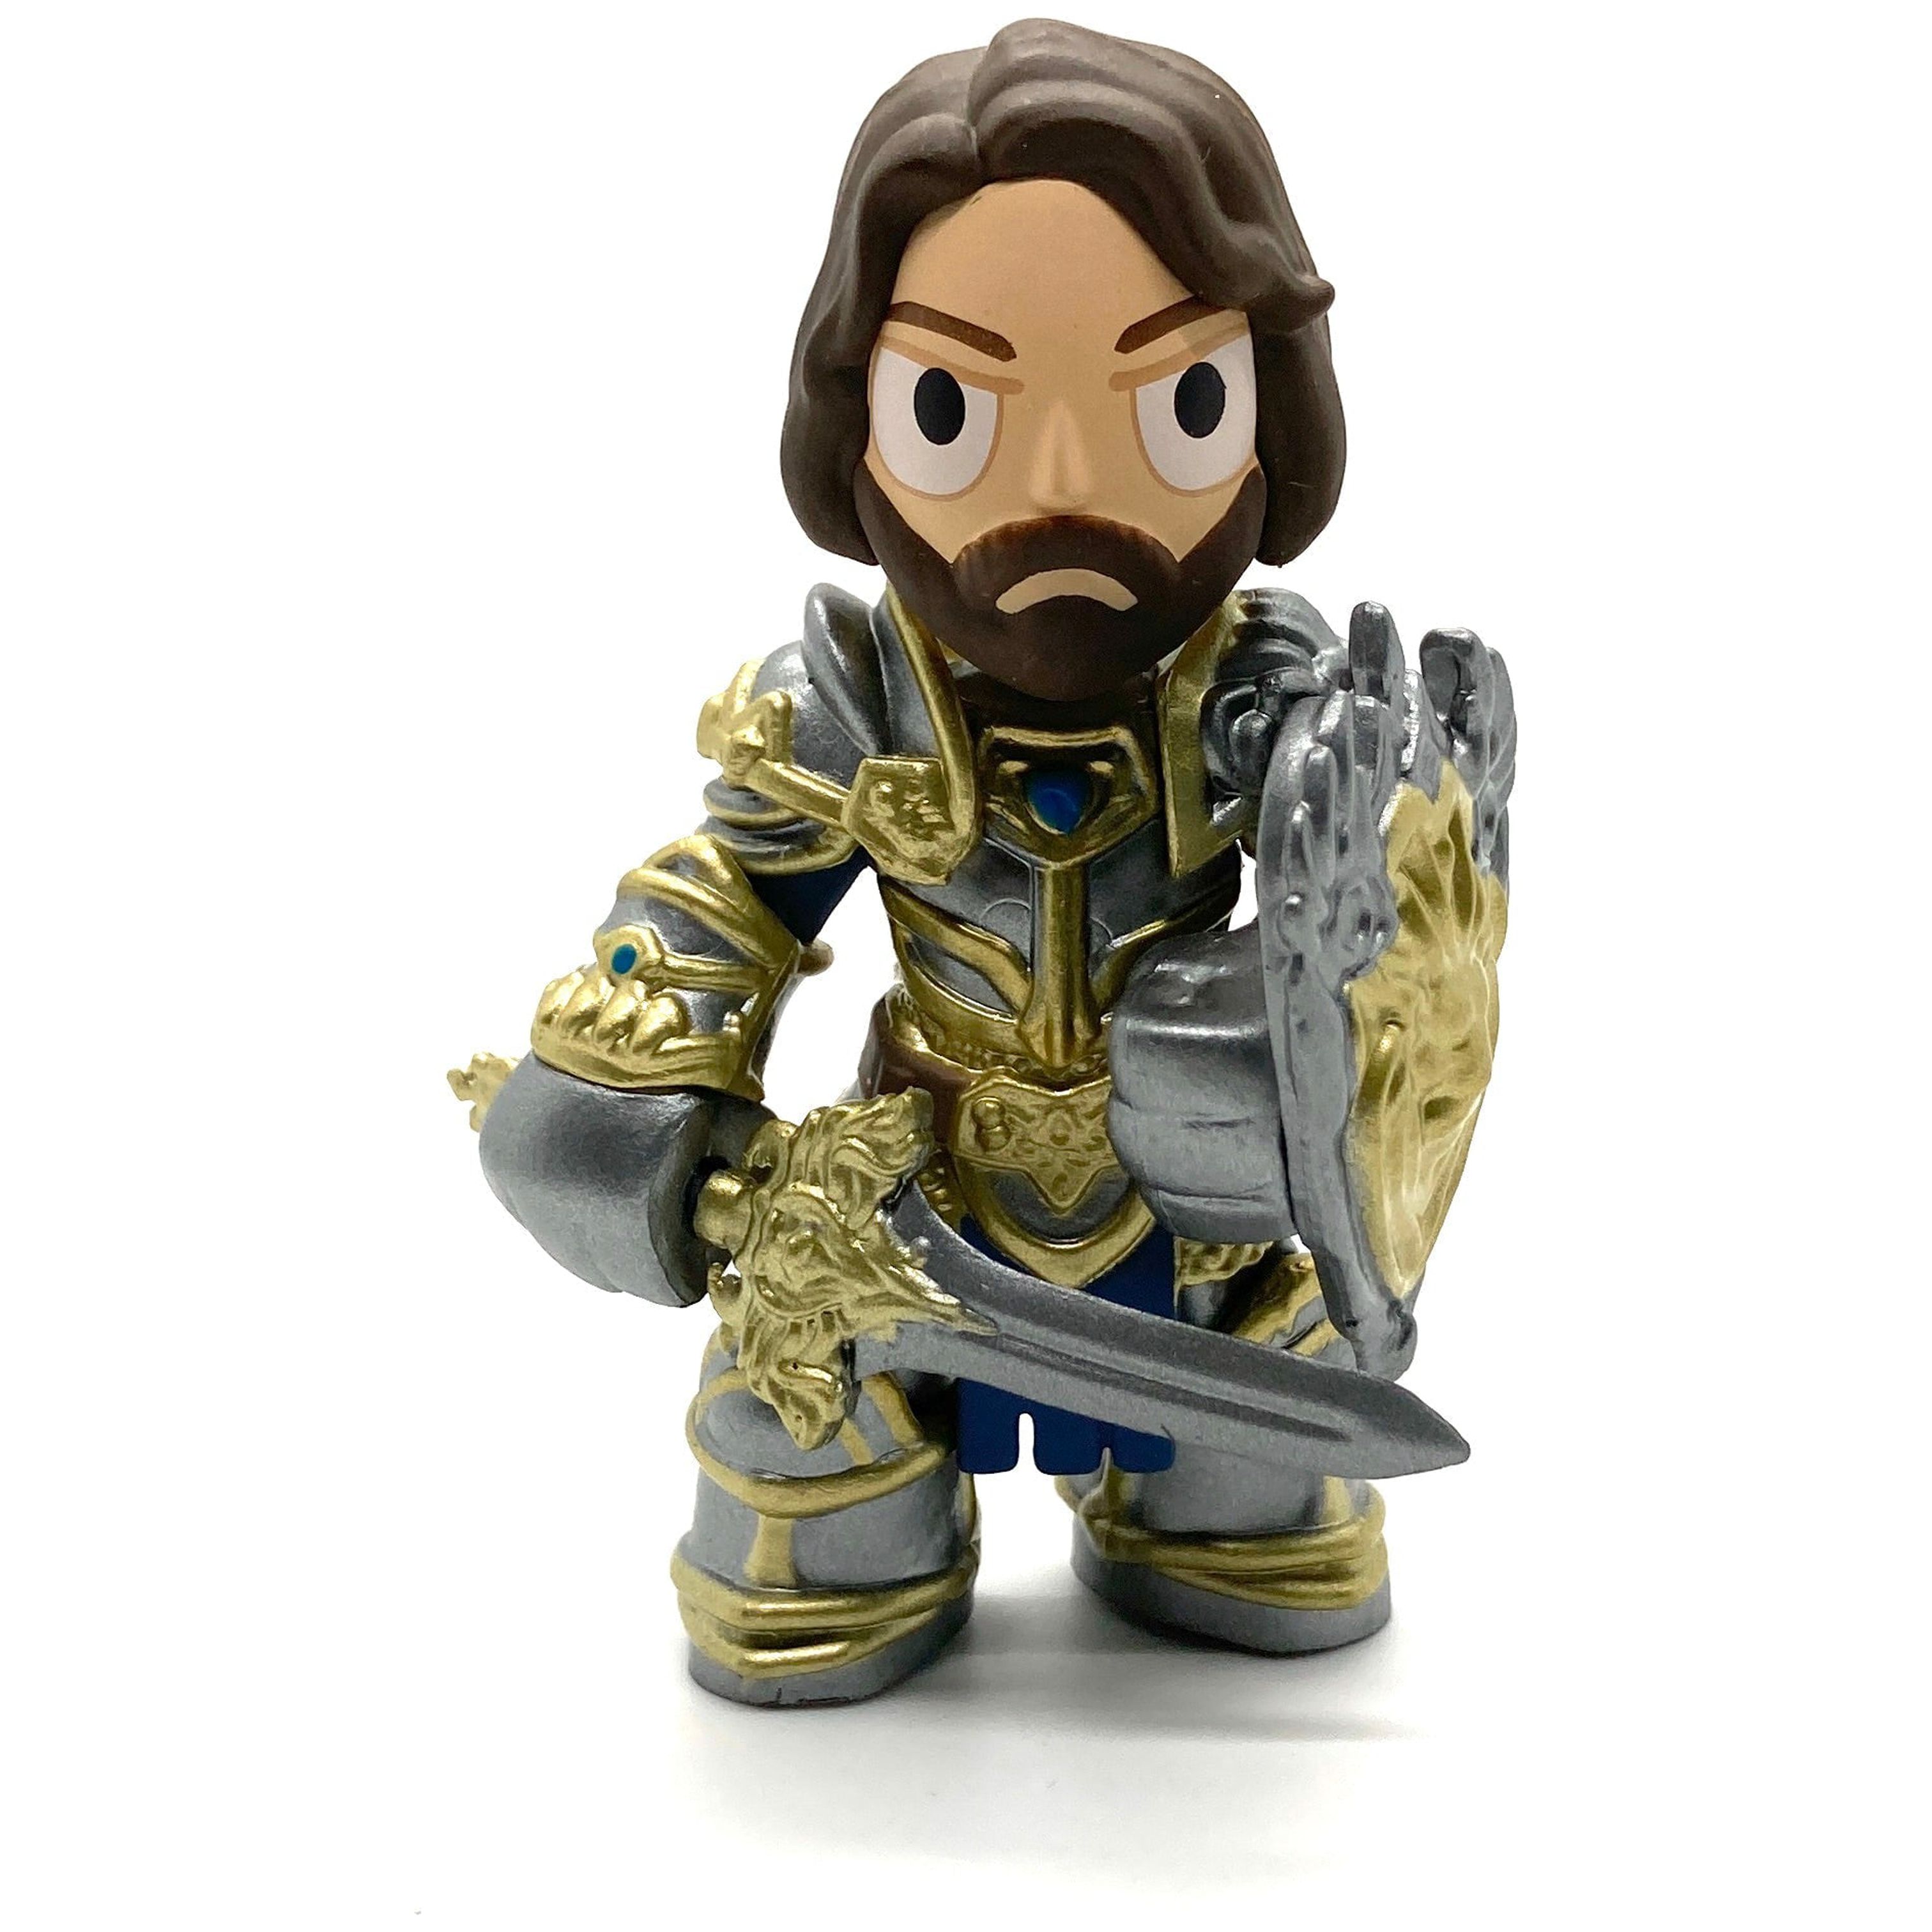 Funko Mystery Mini  World of Warcraft King LLane Wrynn with Armored Vinyl Figure - image 1 of 2